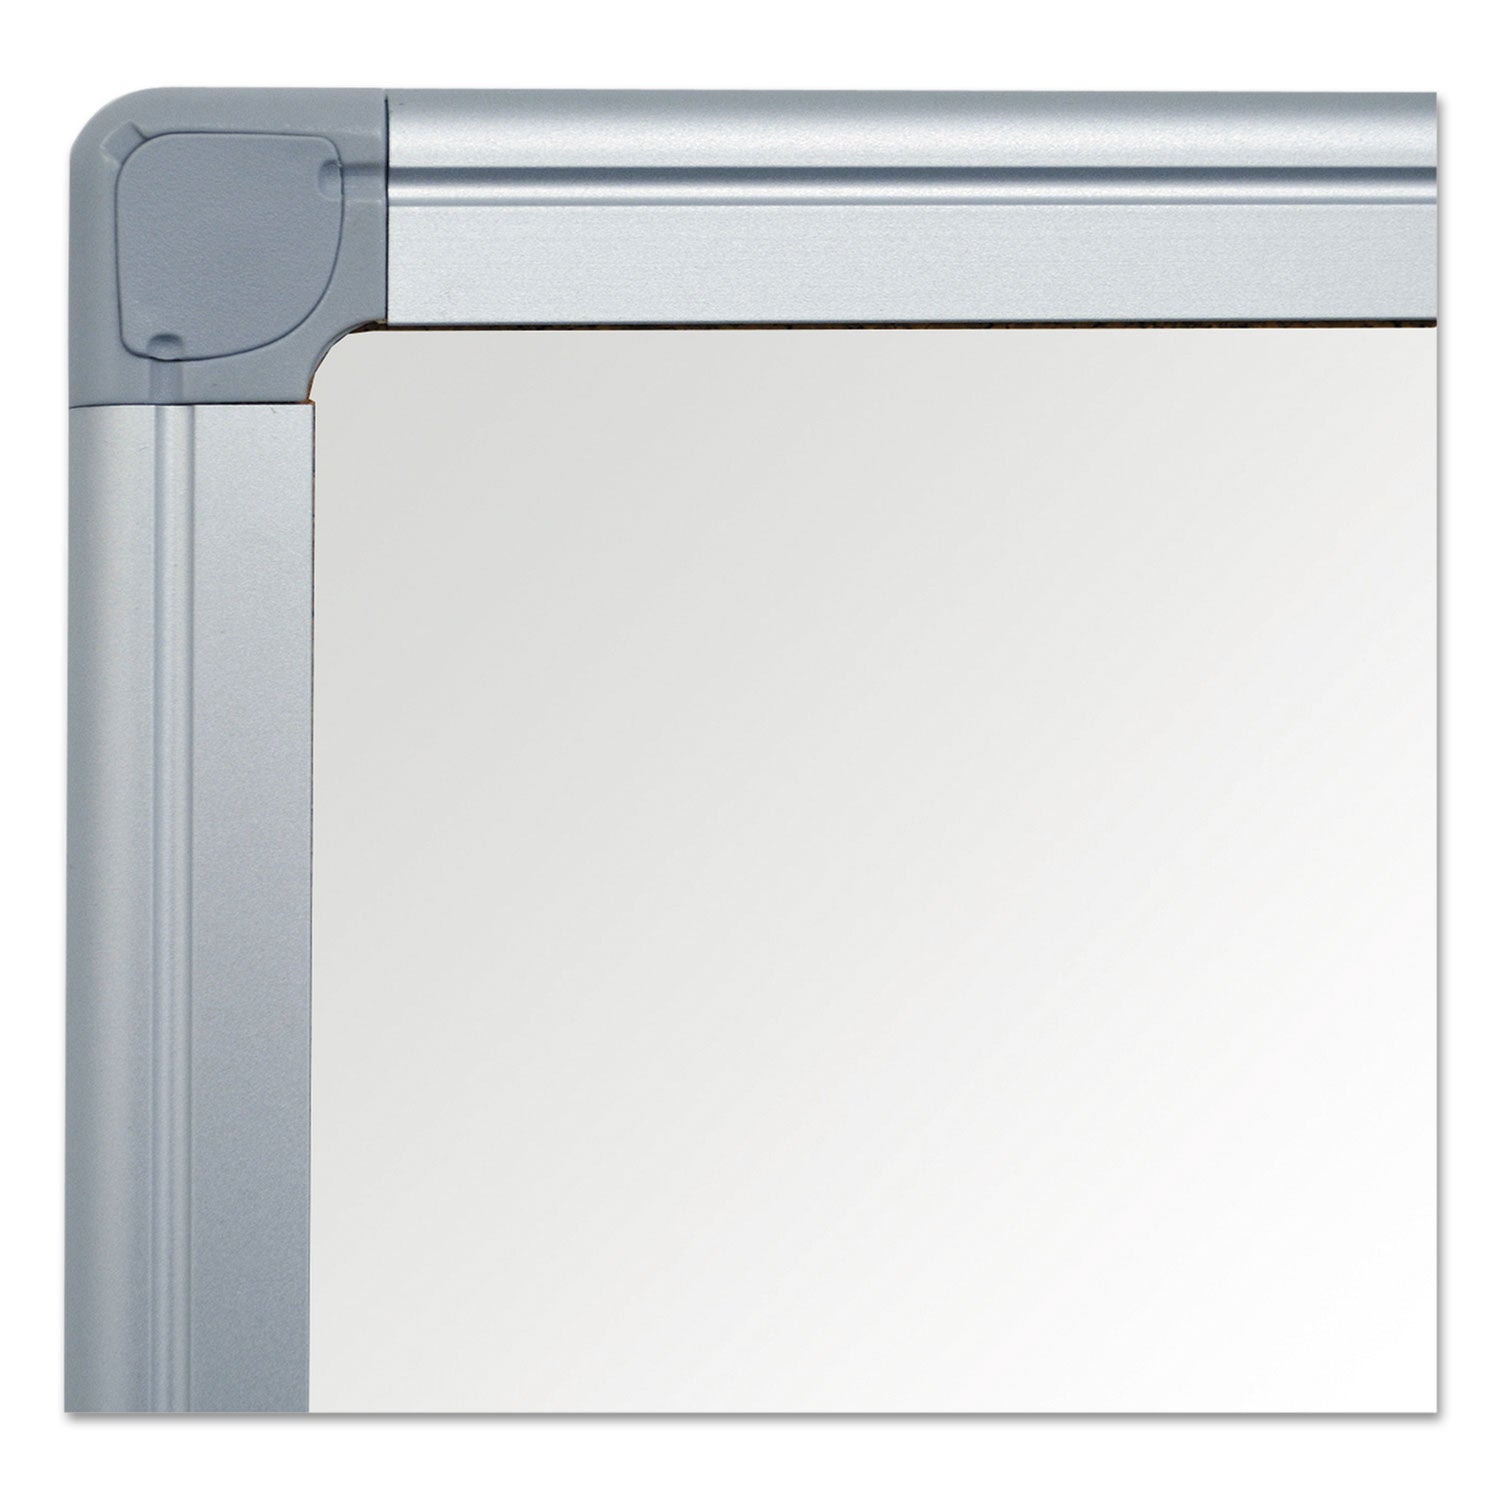 value-lacquered-steel-magnetic-dry-erase-board-48-x-36-white-surface-silver-aluminum-frame_bvcma0507170 - 3